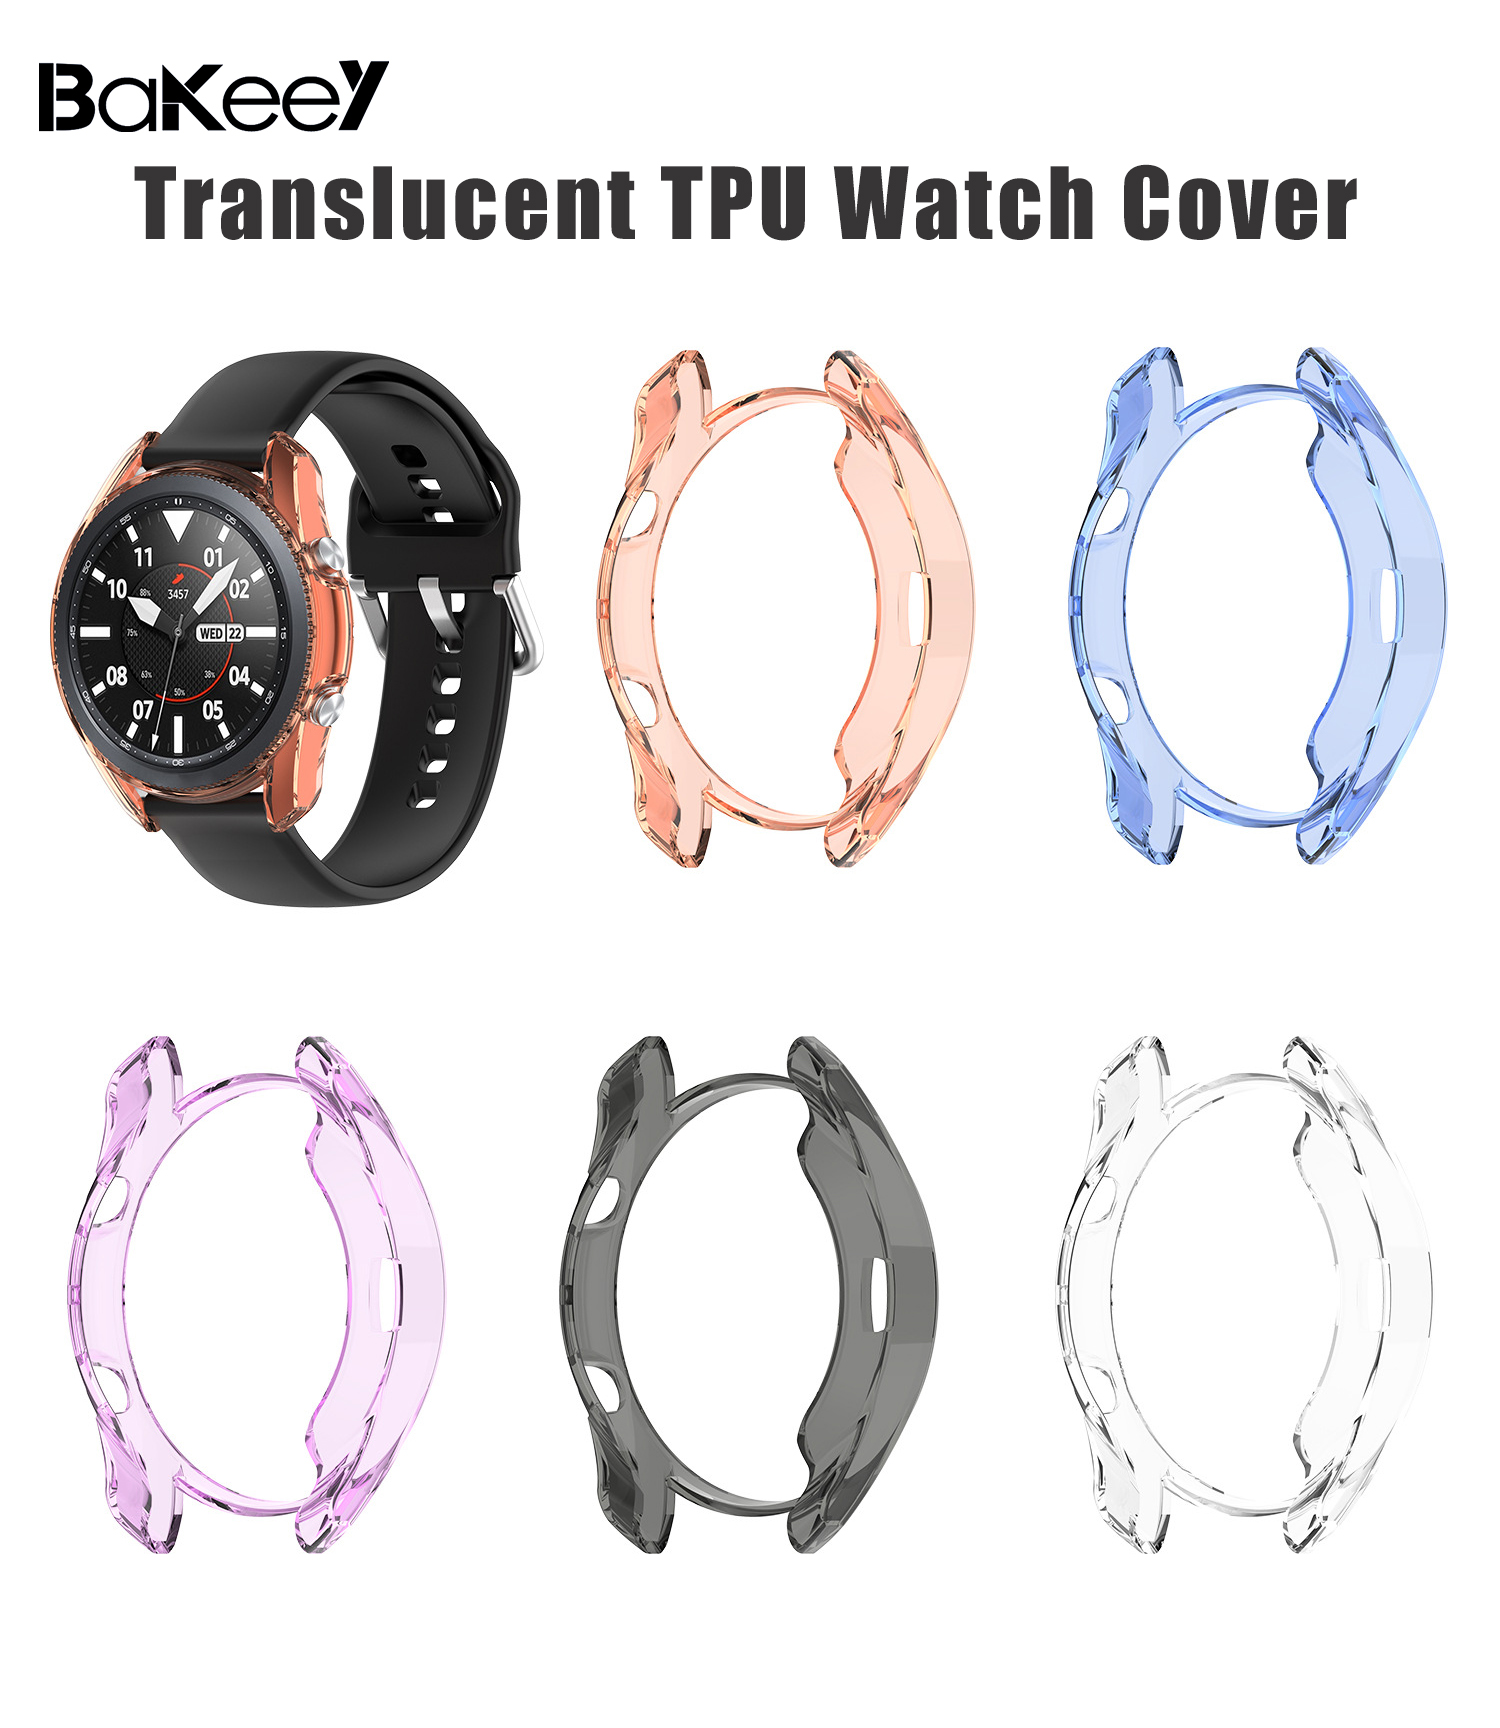 Bakeey-Translucent-Non-Yellow-Soft-TPU-Shockproof-Watch-Case-Cover-for-Samsung-Galaxy-Watch3-45mm-R8-1743917-1